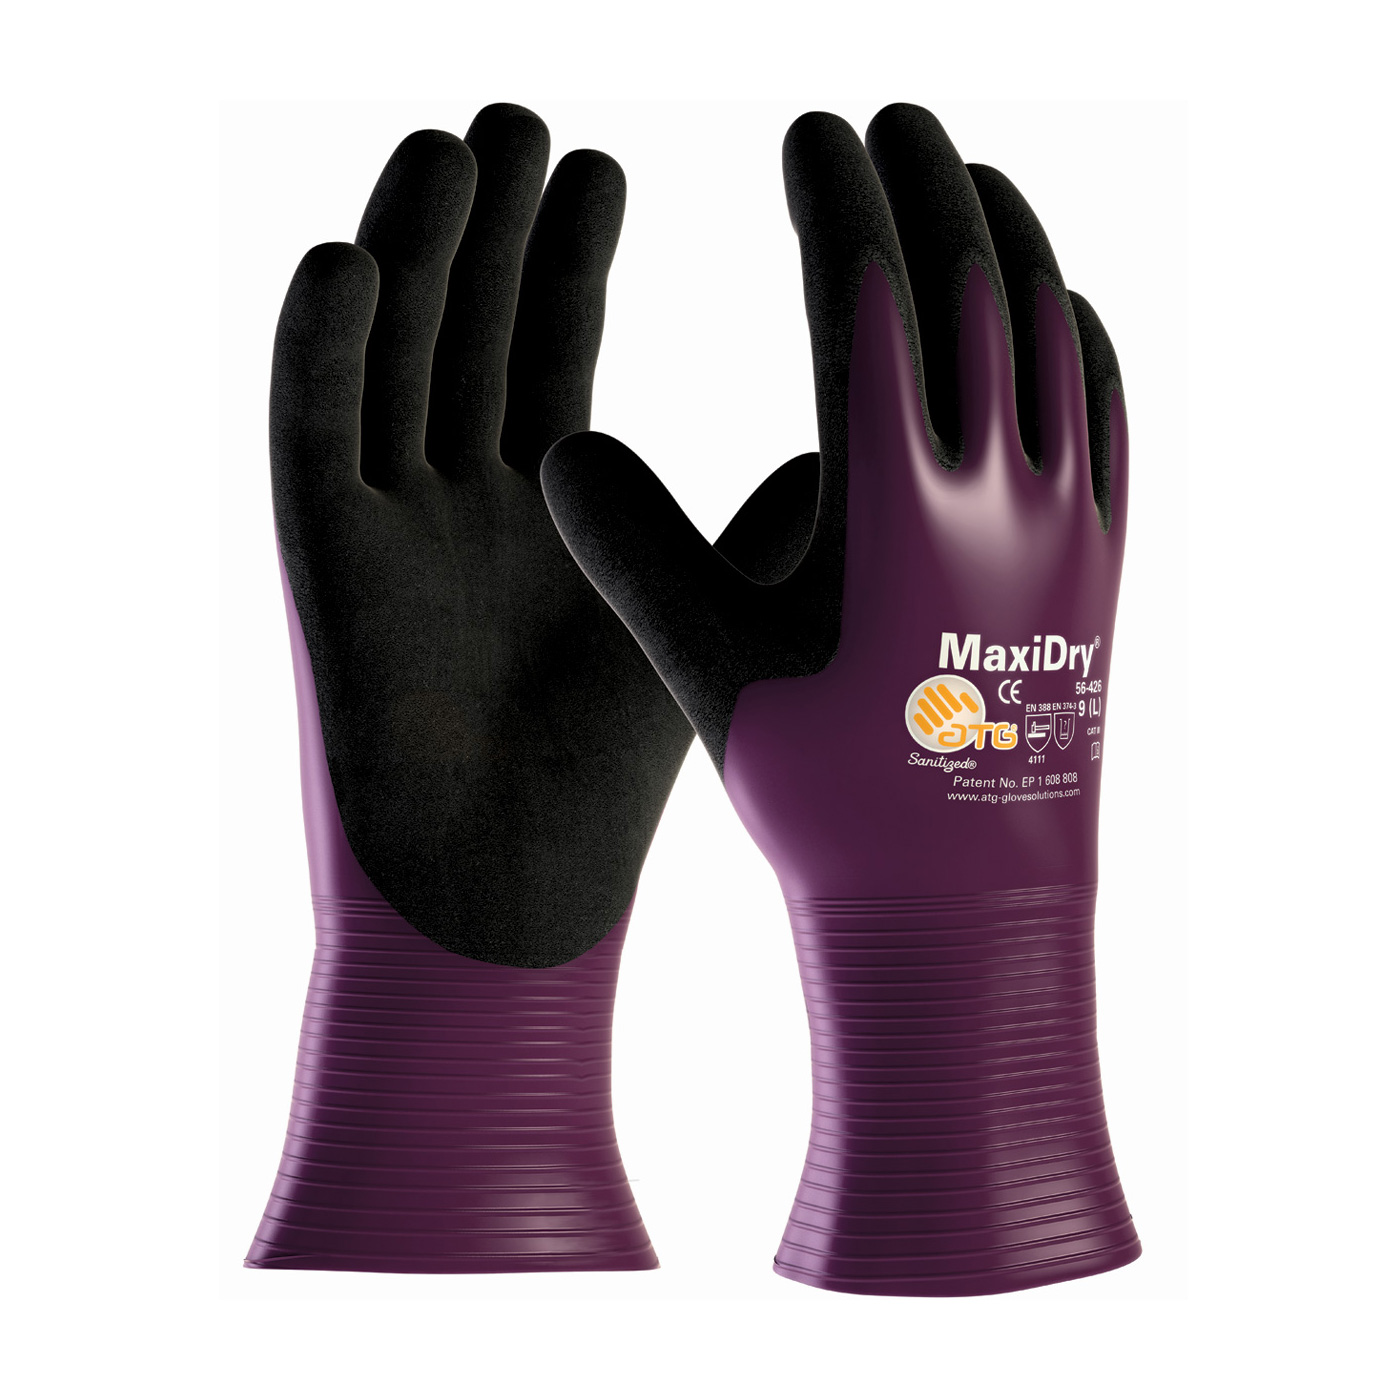 ULTRA LIGHTWEIGHT NITRILE GLOVE, FULLY DIPPED WITH SEAMLESS KNIT NYLON / ELASTANE LINER AND NON-SLIP GRIP ON PALM & FINGERS